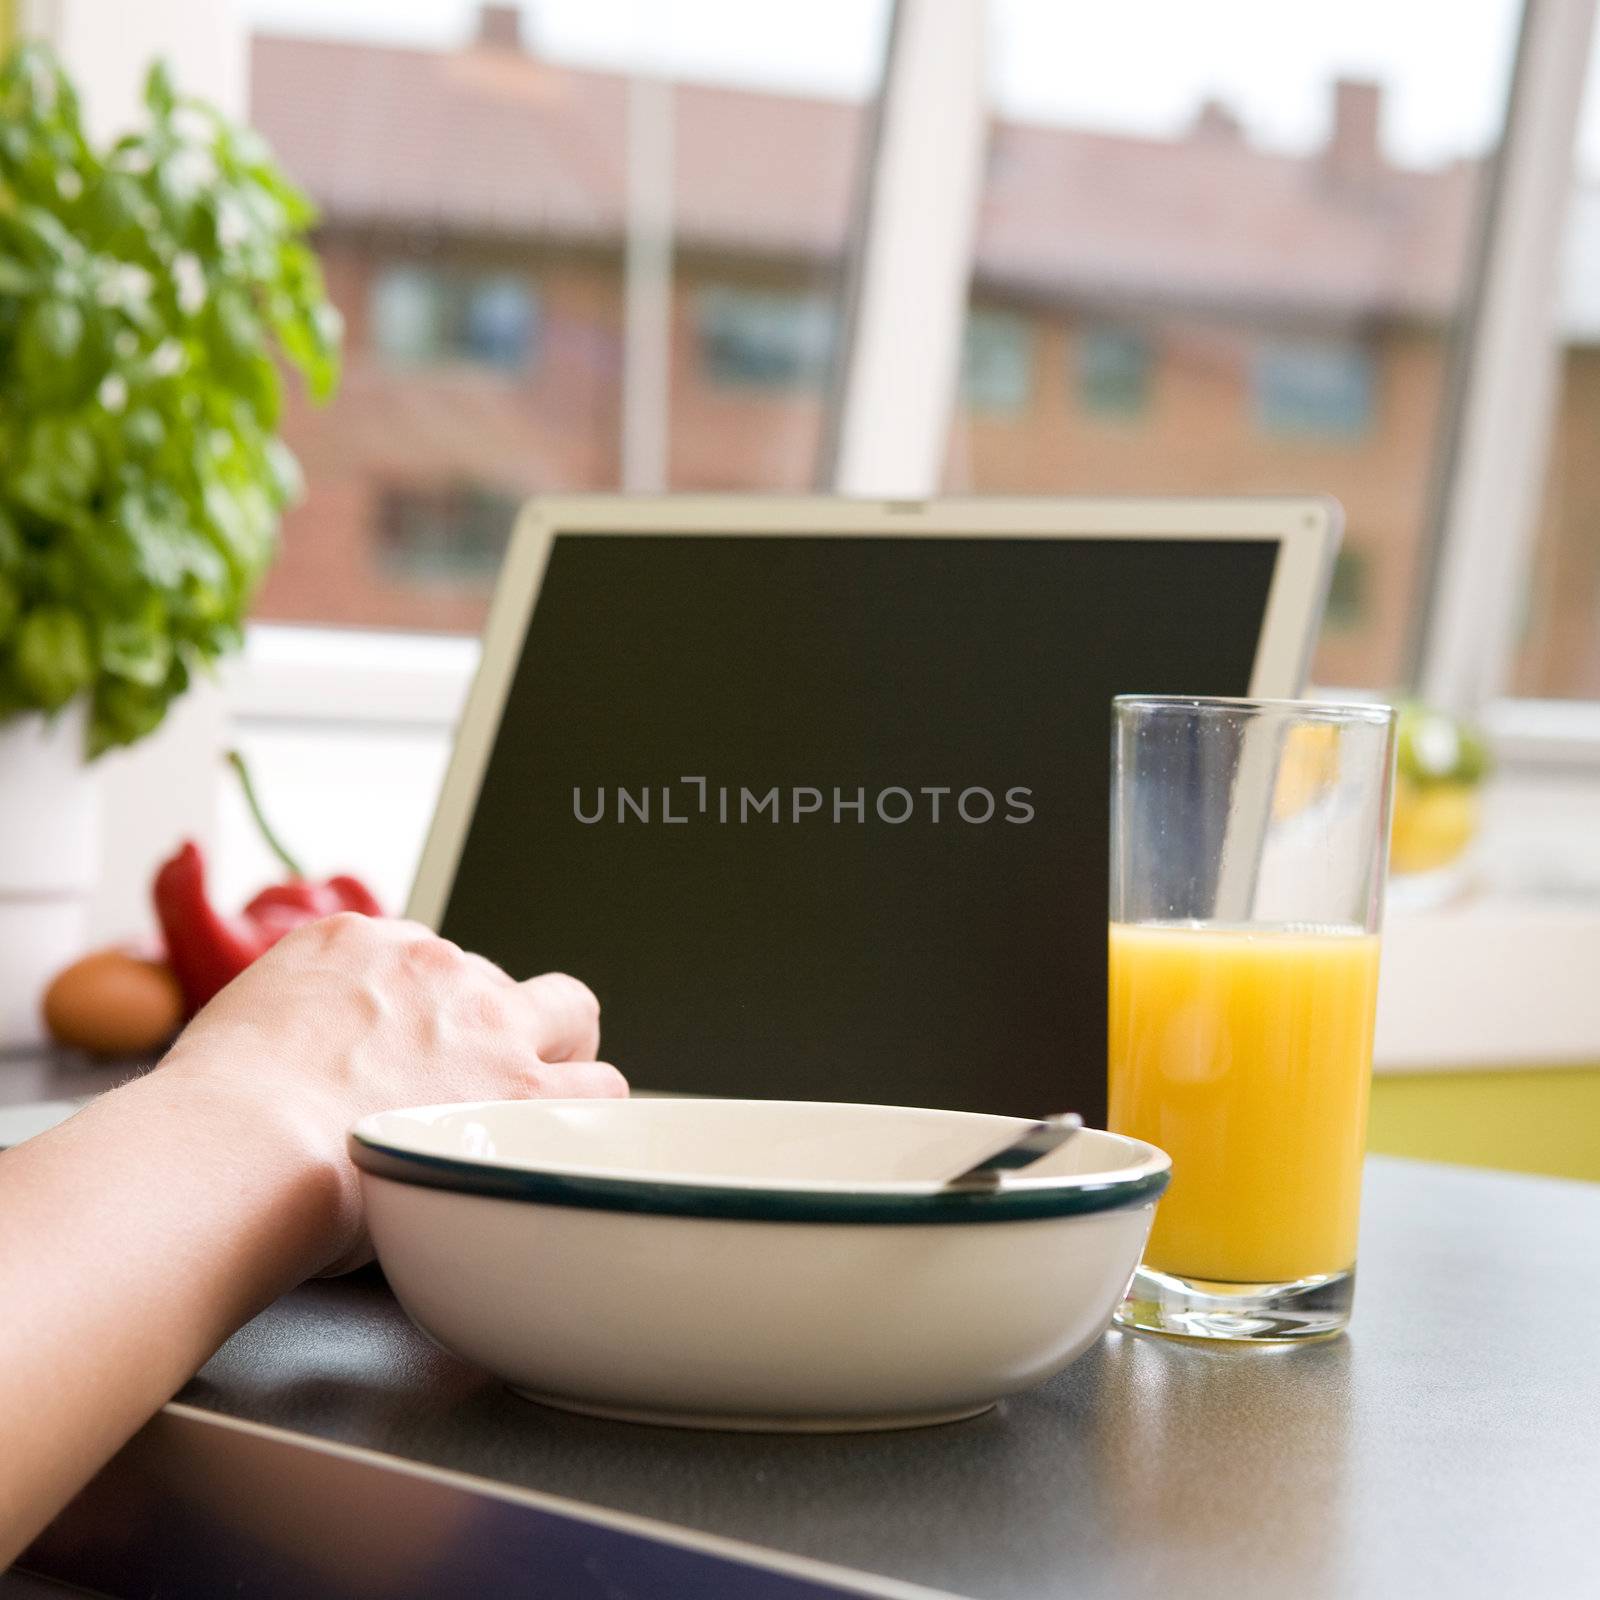 A computer in the kitchen with a bowl of soupr or cereal and orange juice - shallow depth of field with focus on juice and hand